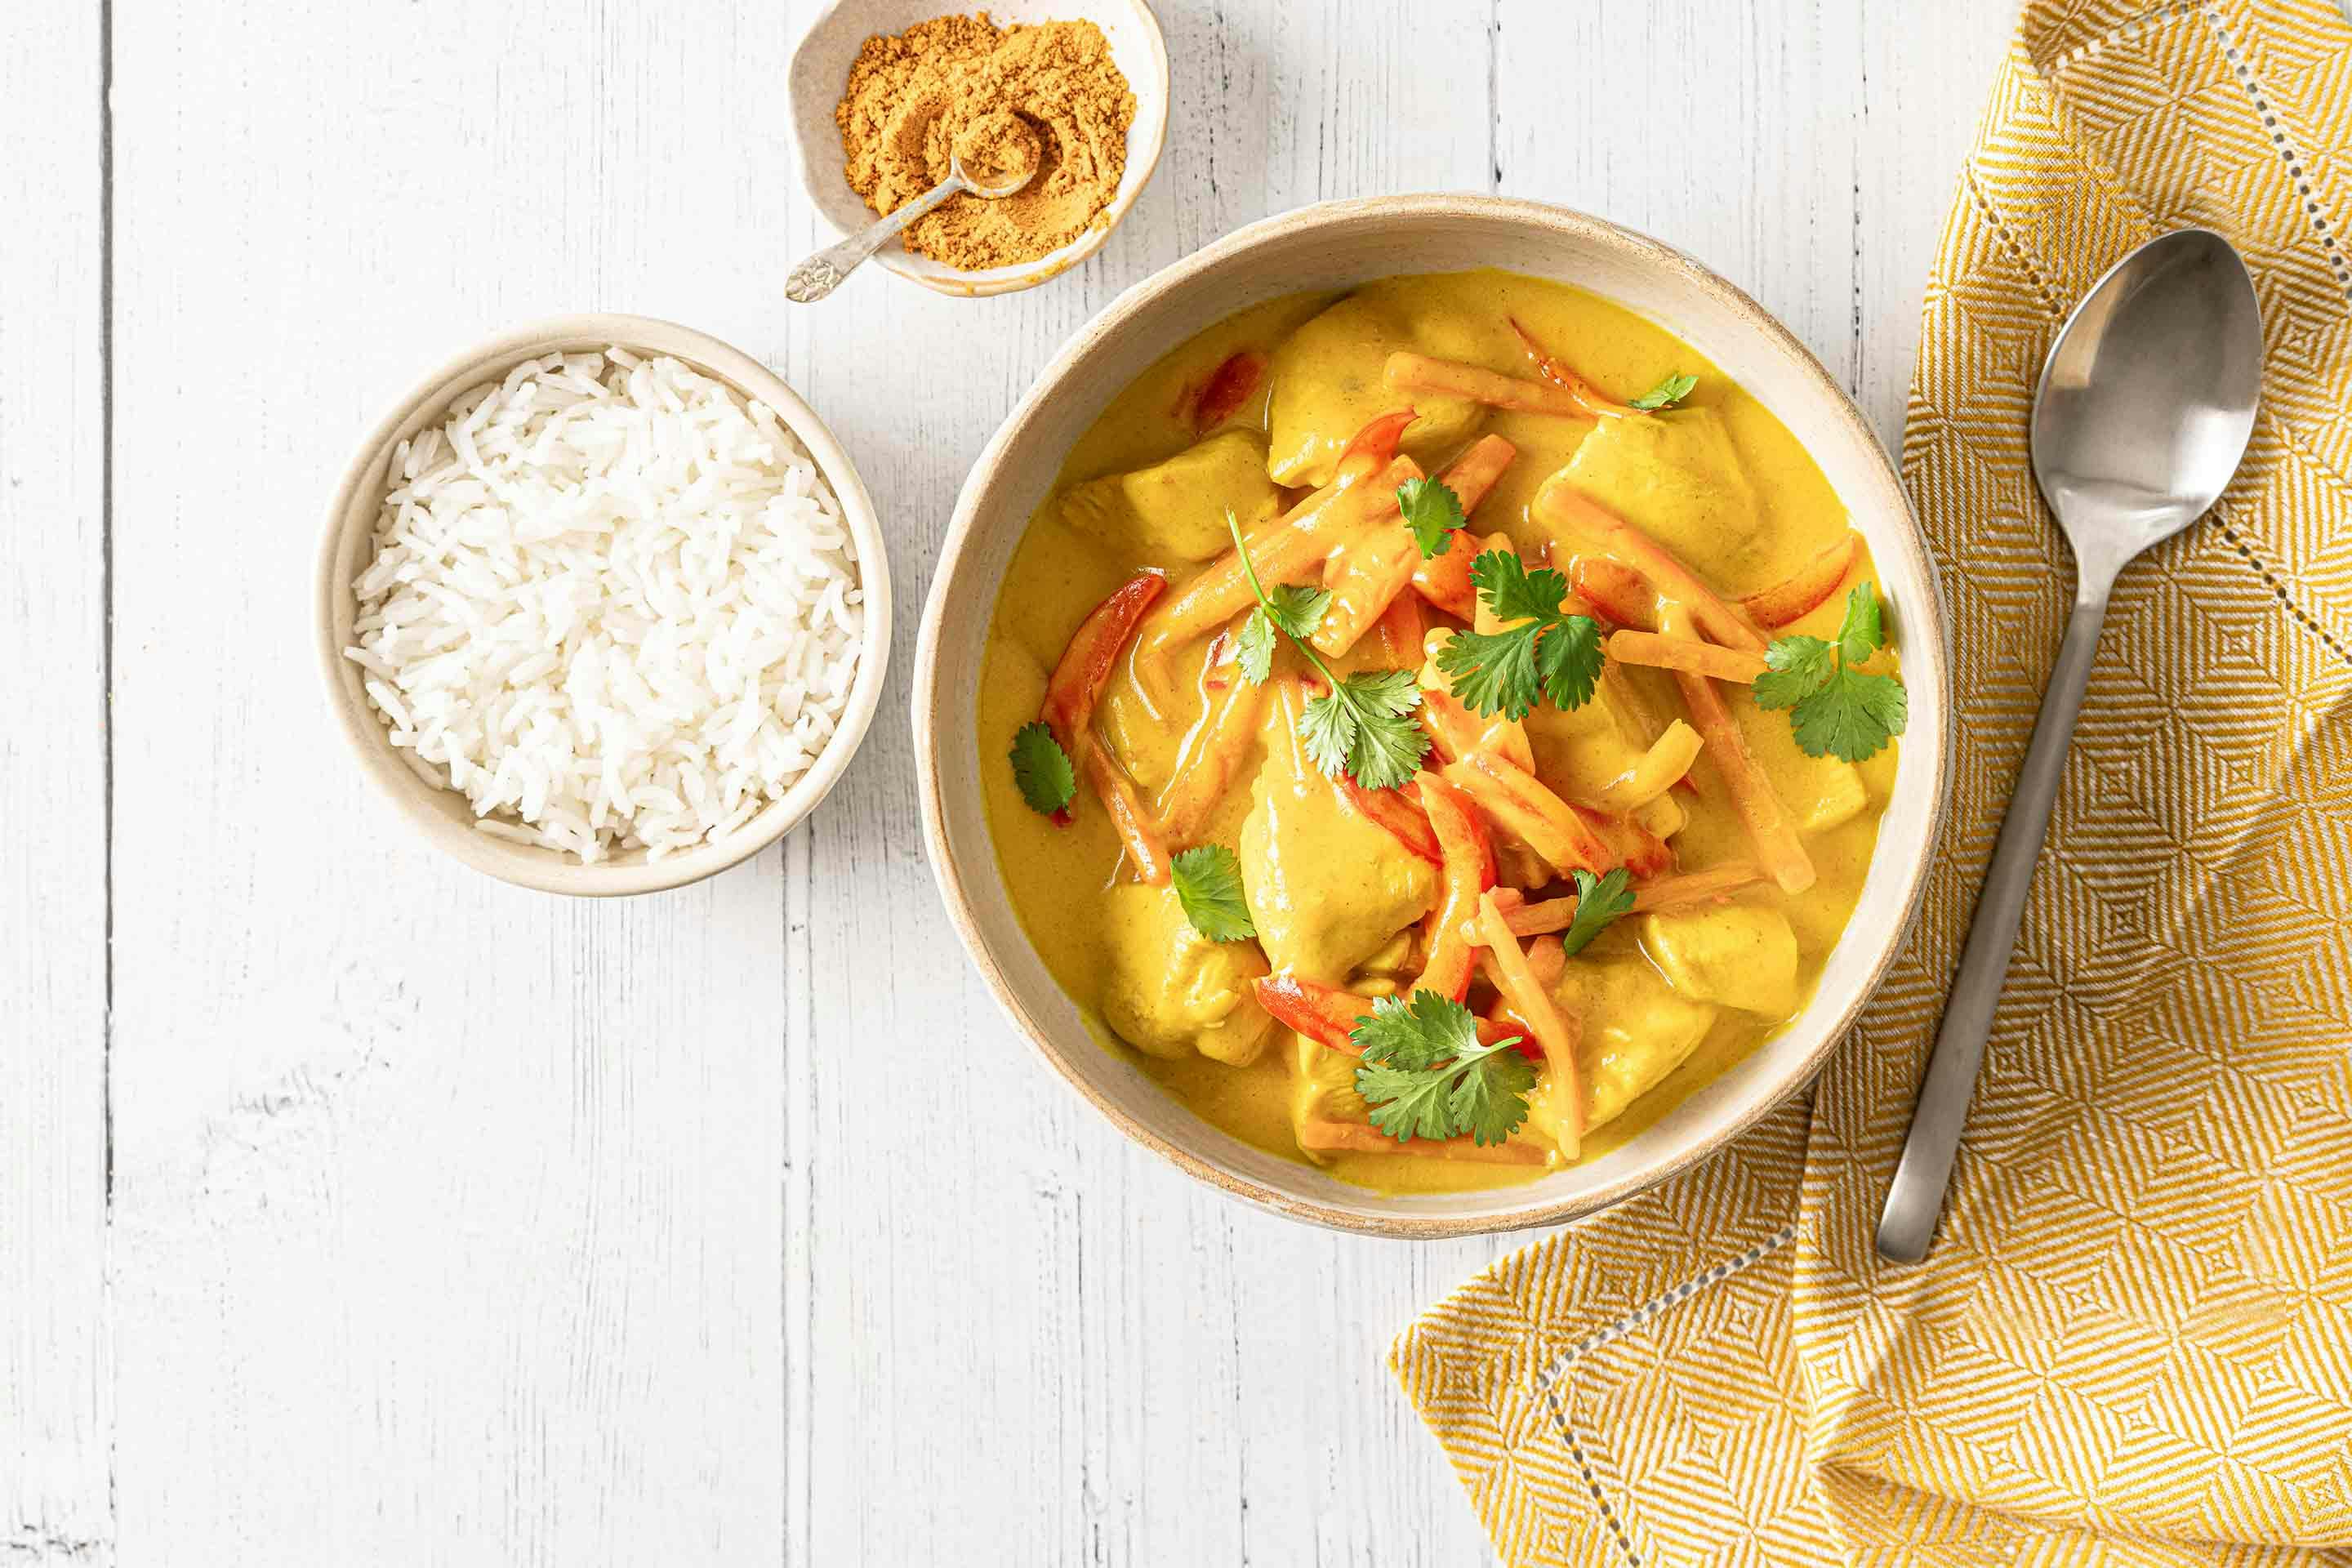 Flavorful coconut chicken curry on basmati rice – done in 20 minutes!